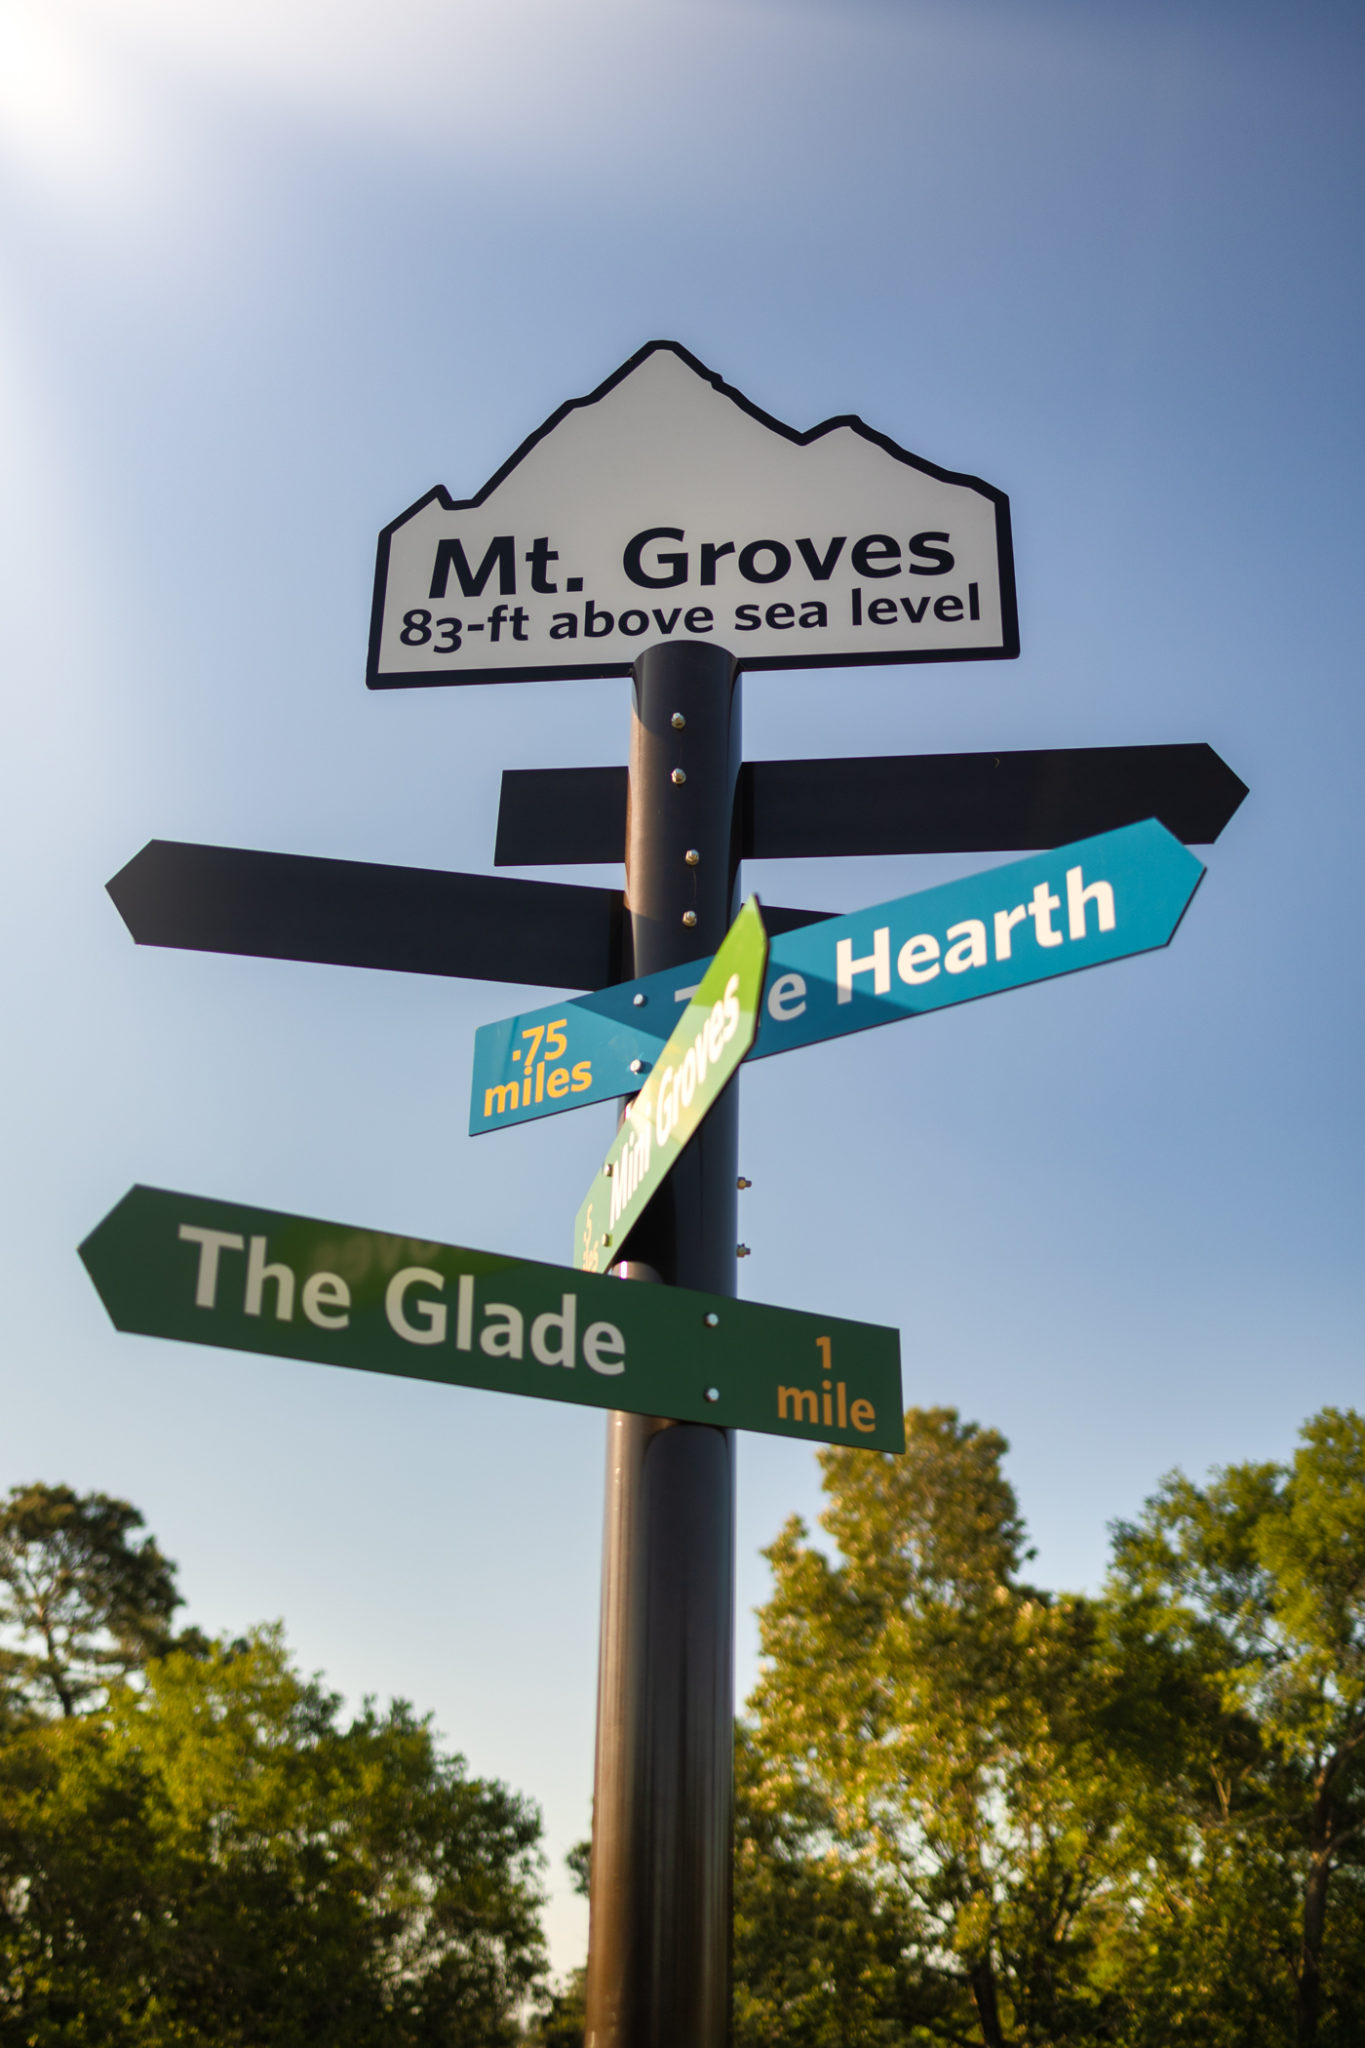 Mt. Groves is located almost equidistant between The Glade and The Hearth.